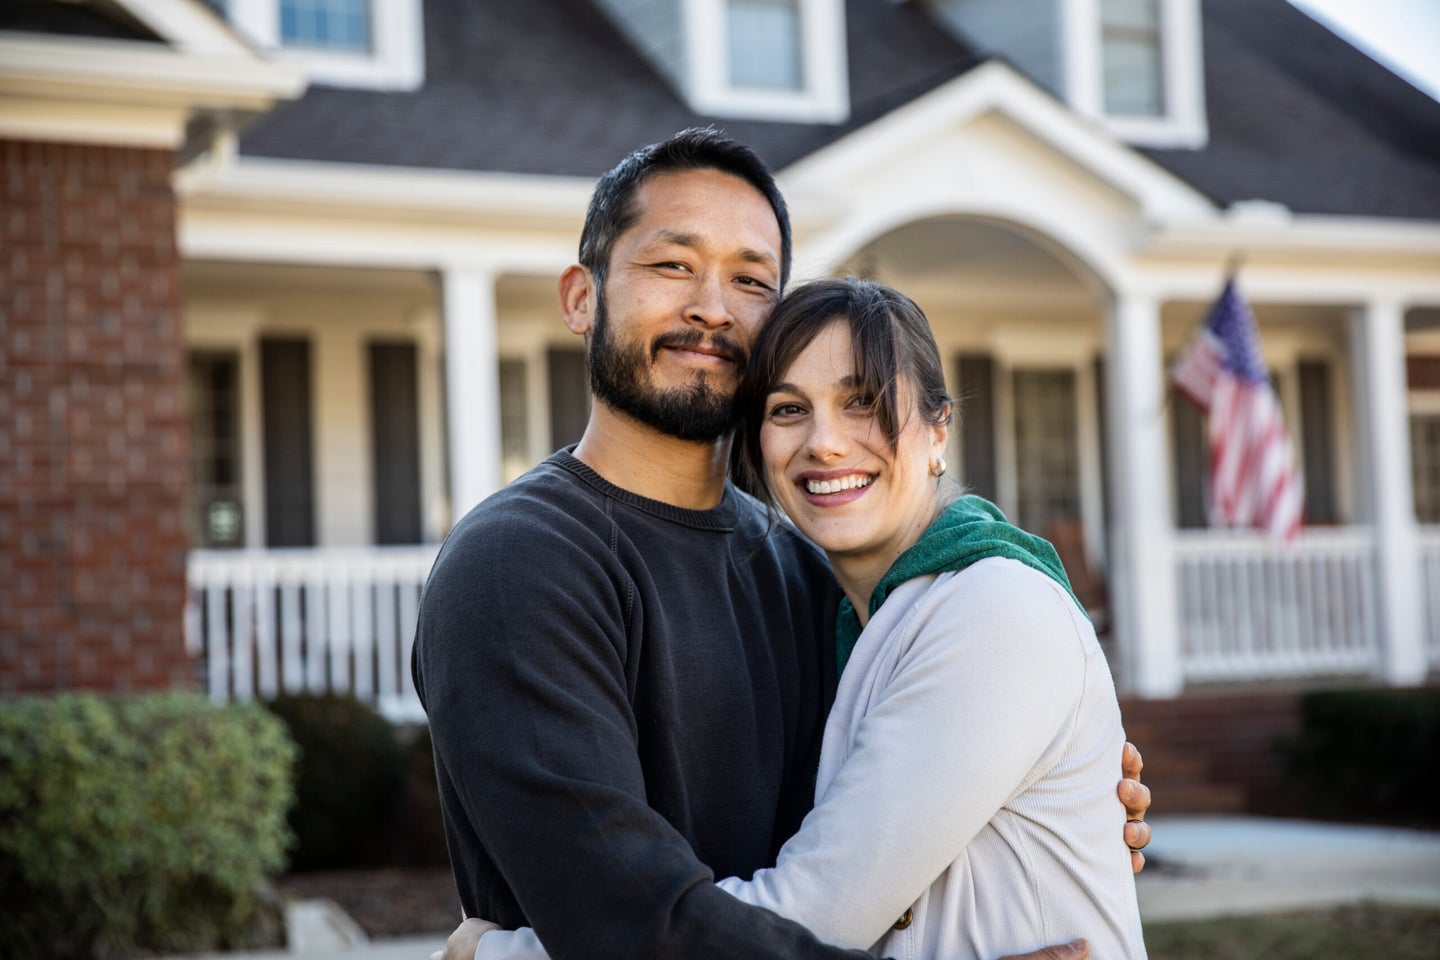 Is a home purchase while on active duty the right choice?